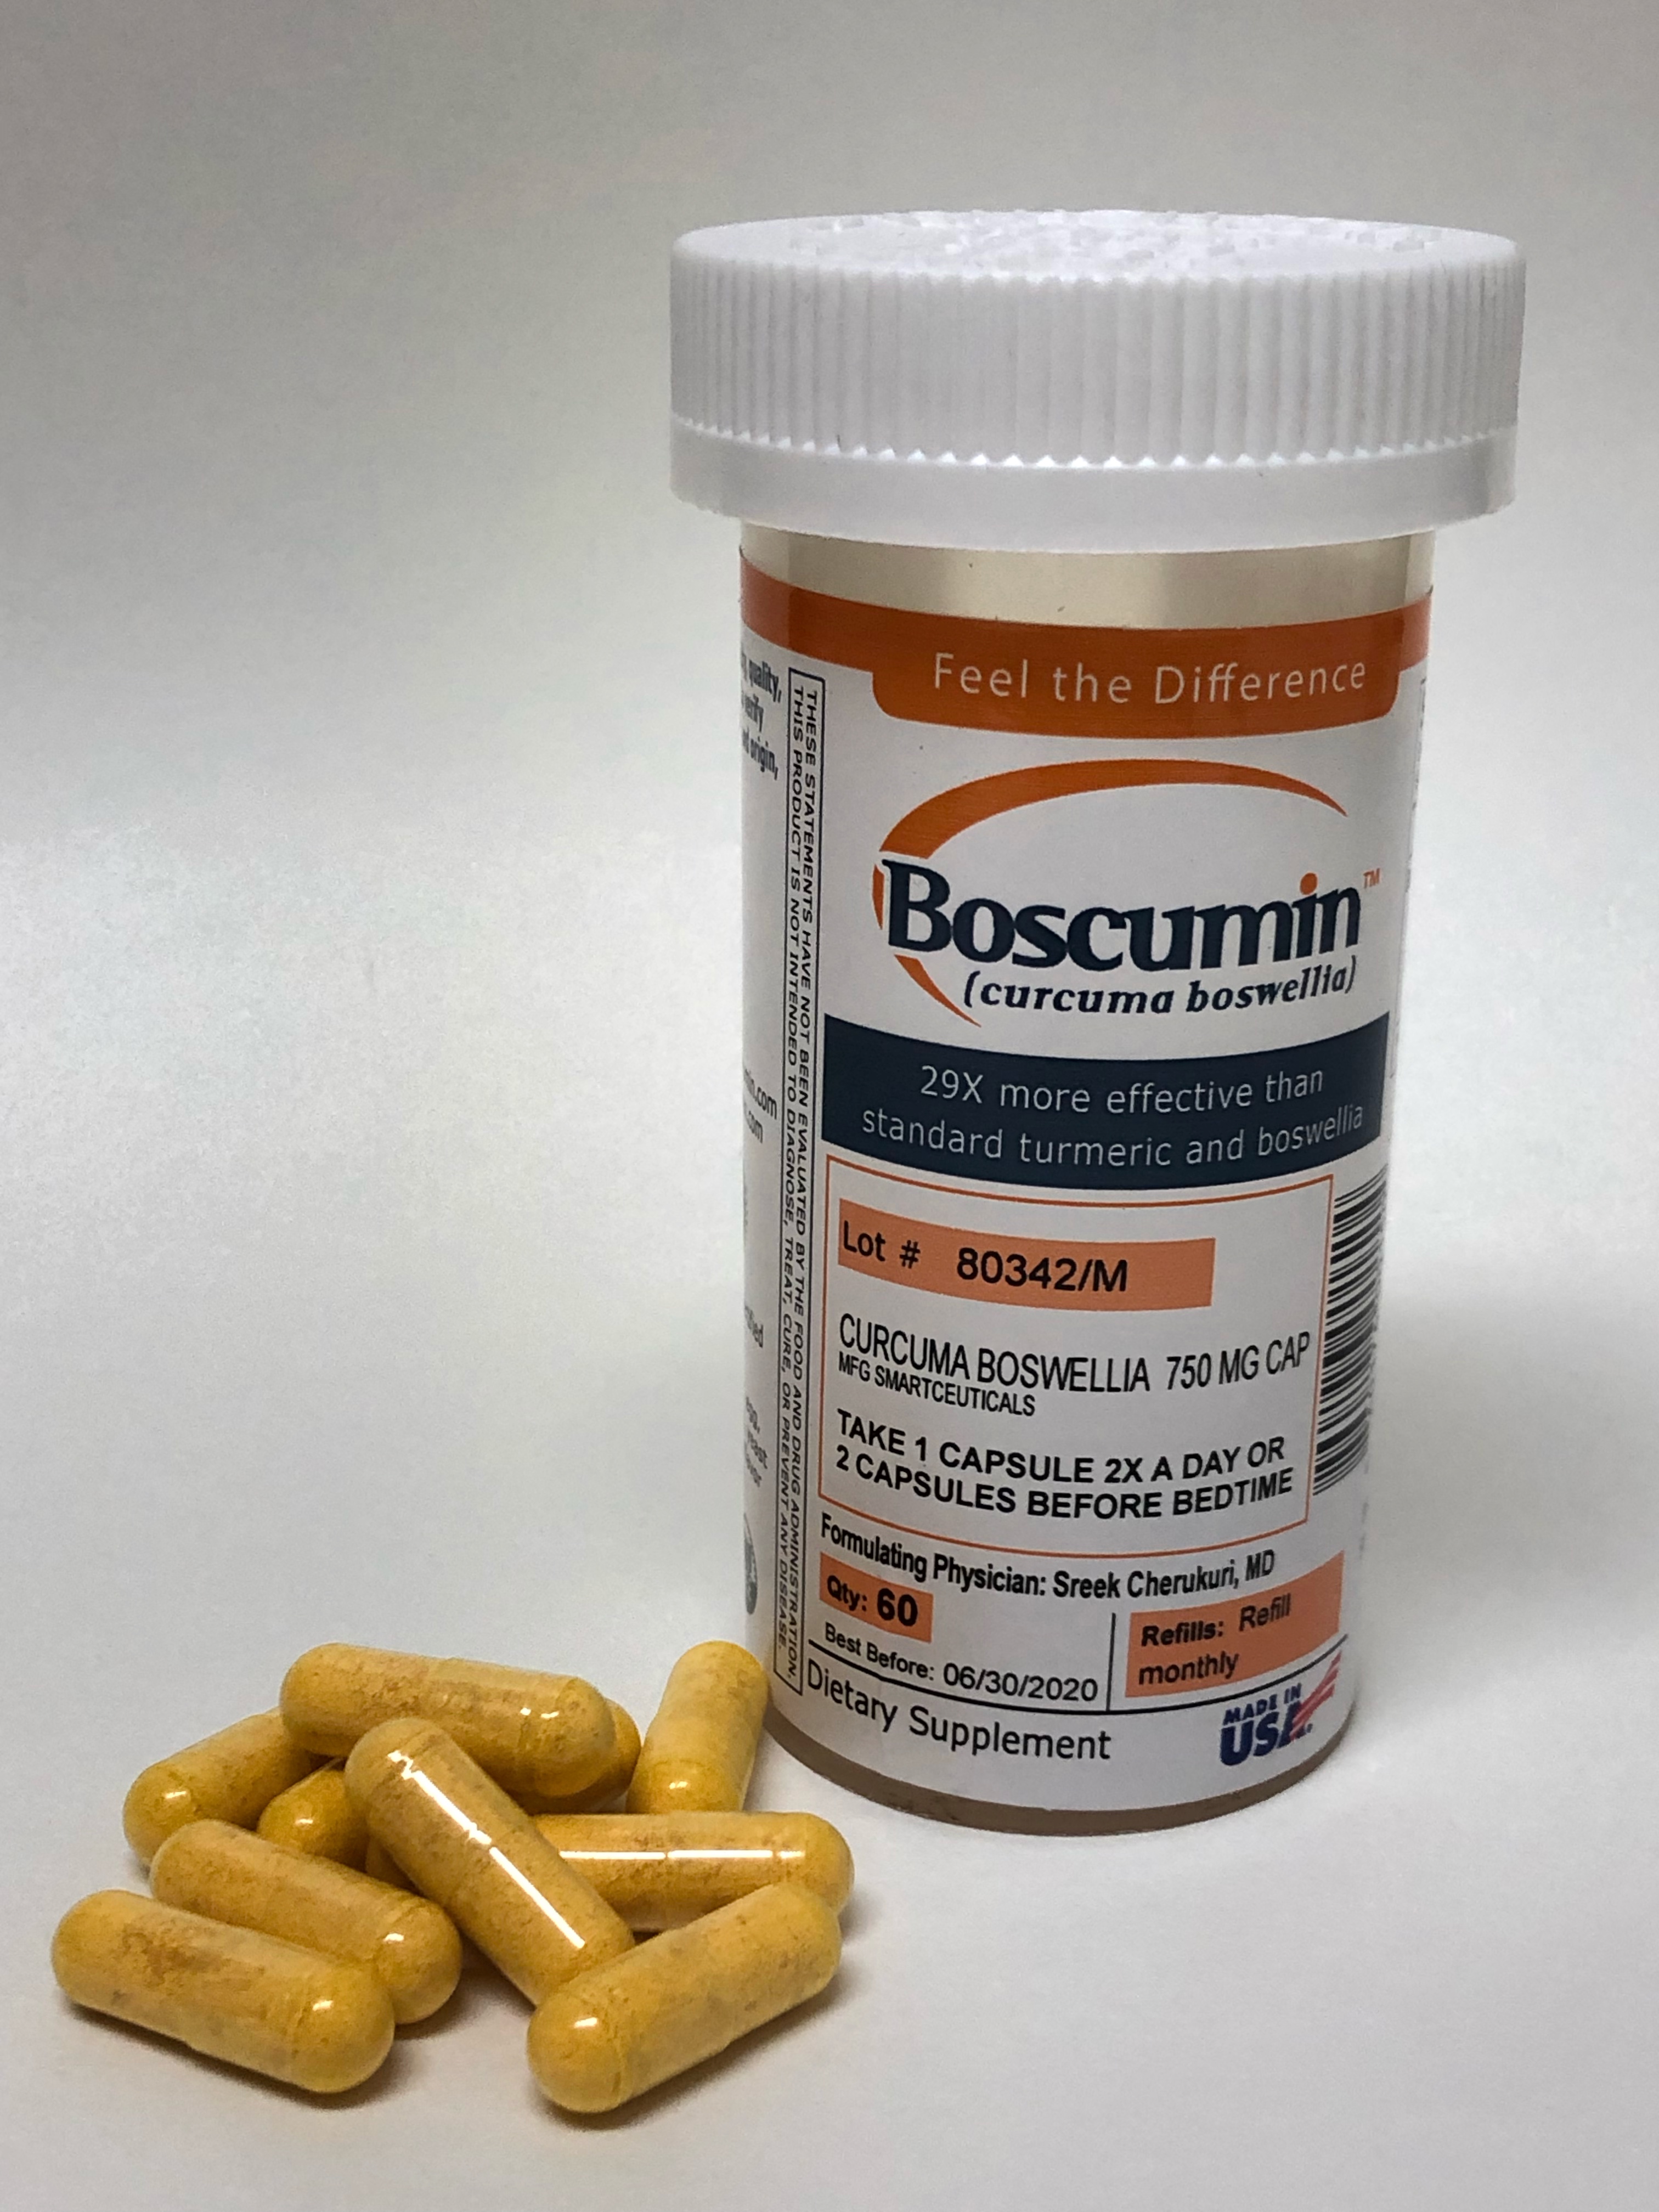 Boscumin bottle with yellow capsules